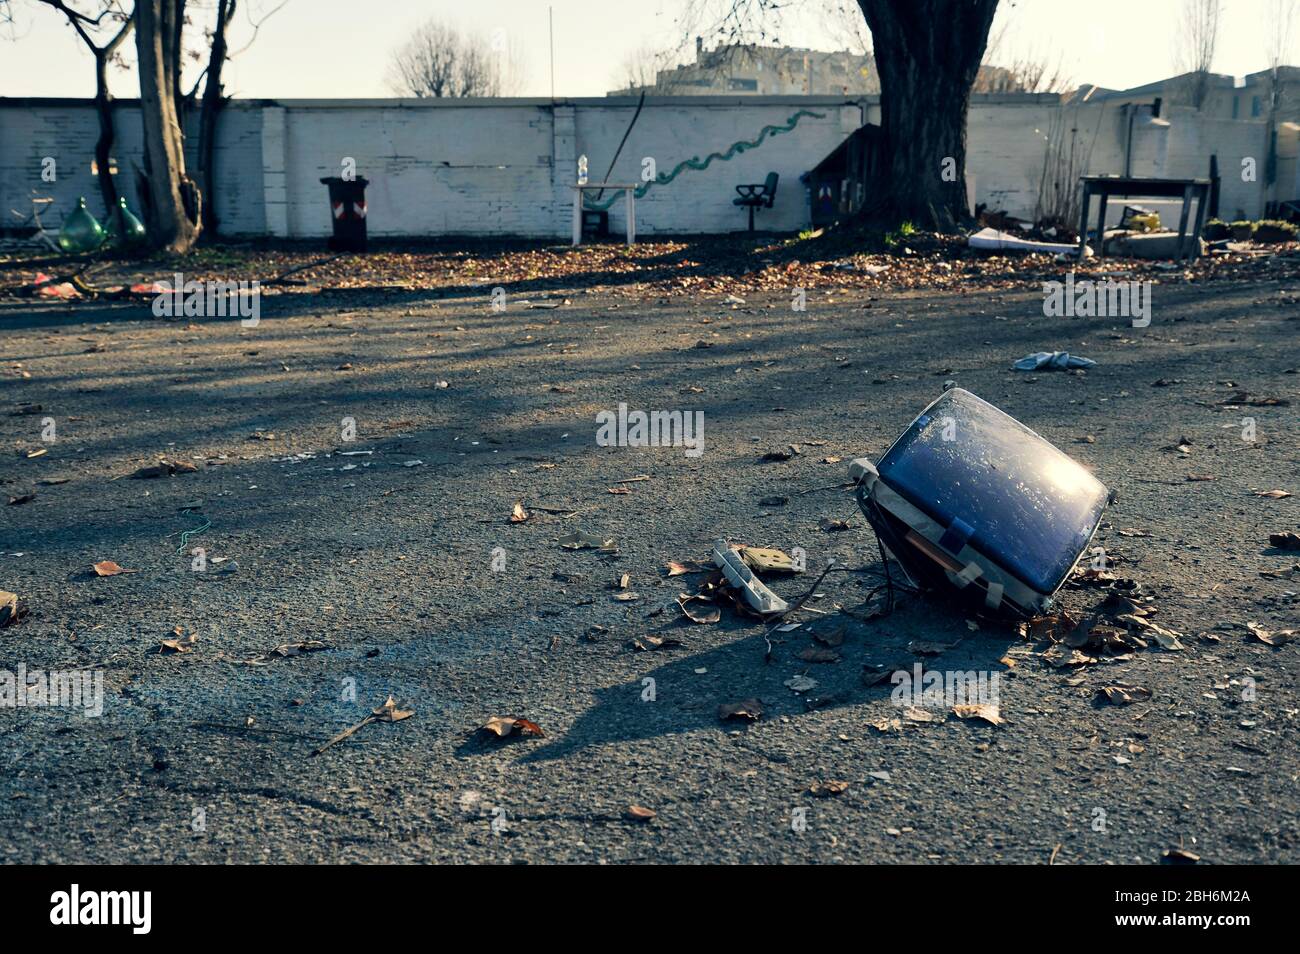 Old CRT (Cathode ray tube) television on a asphalt floor in an abandoned area. Environmental degradation concept. Obsolete technologies concept. Post Stock Photo